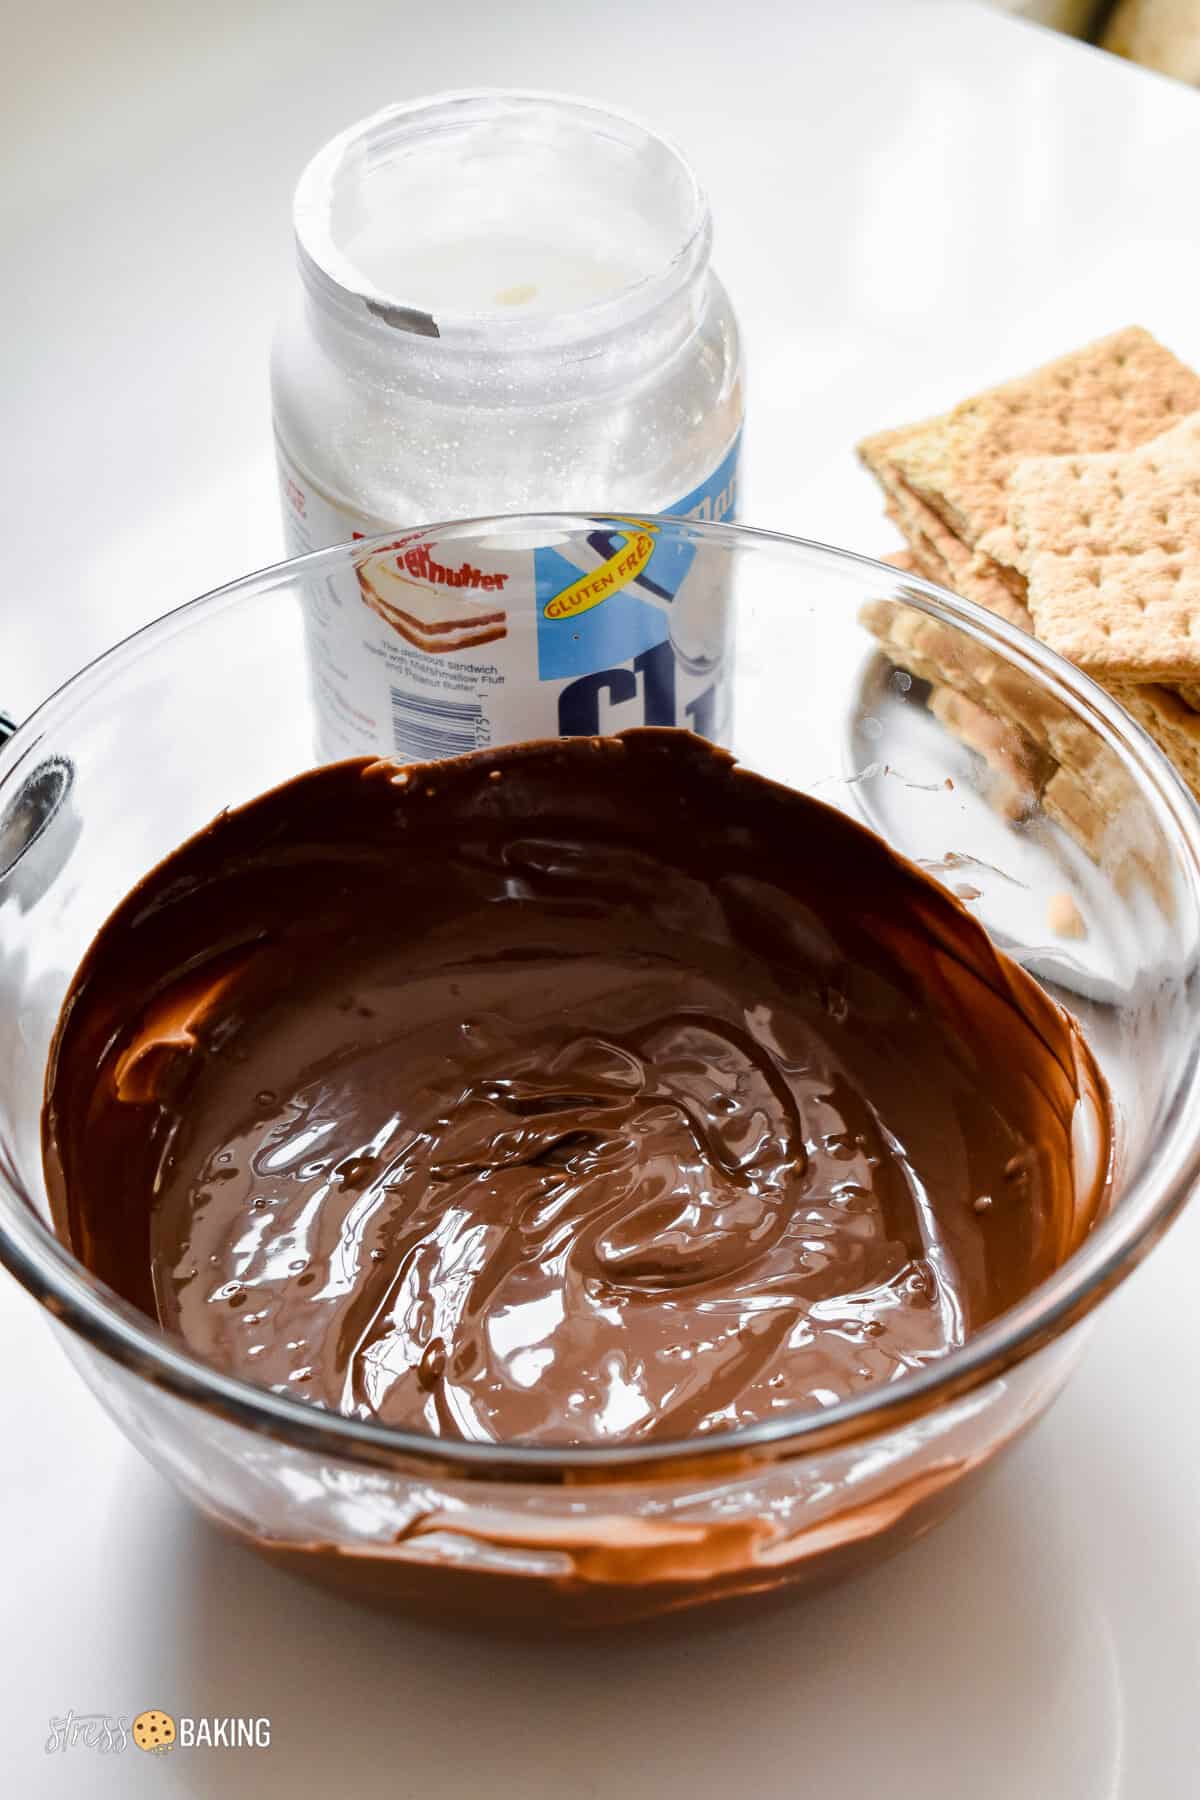 Melted chocolate in a clear mixing bowl